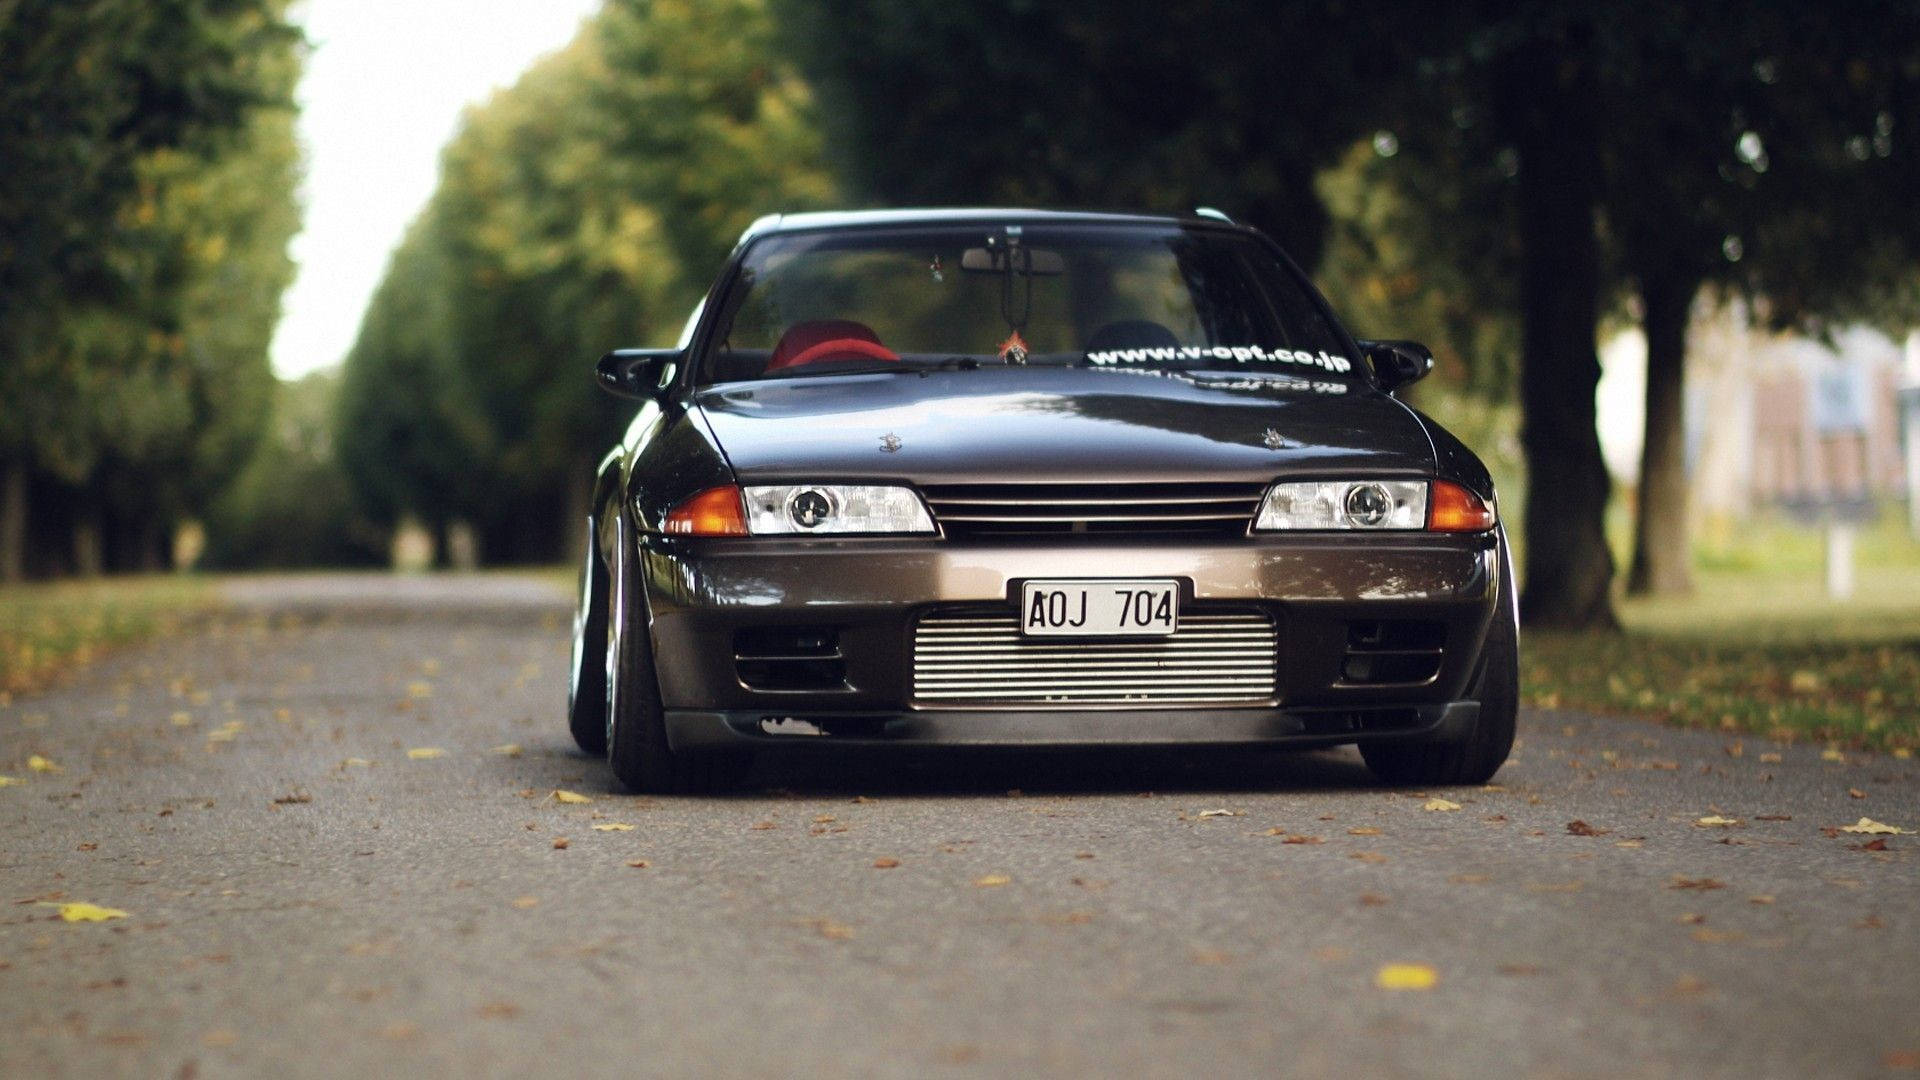 A Timeless Classic - Nissan R32 in the Suburbs Wallpaper